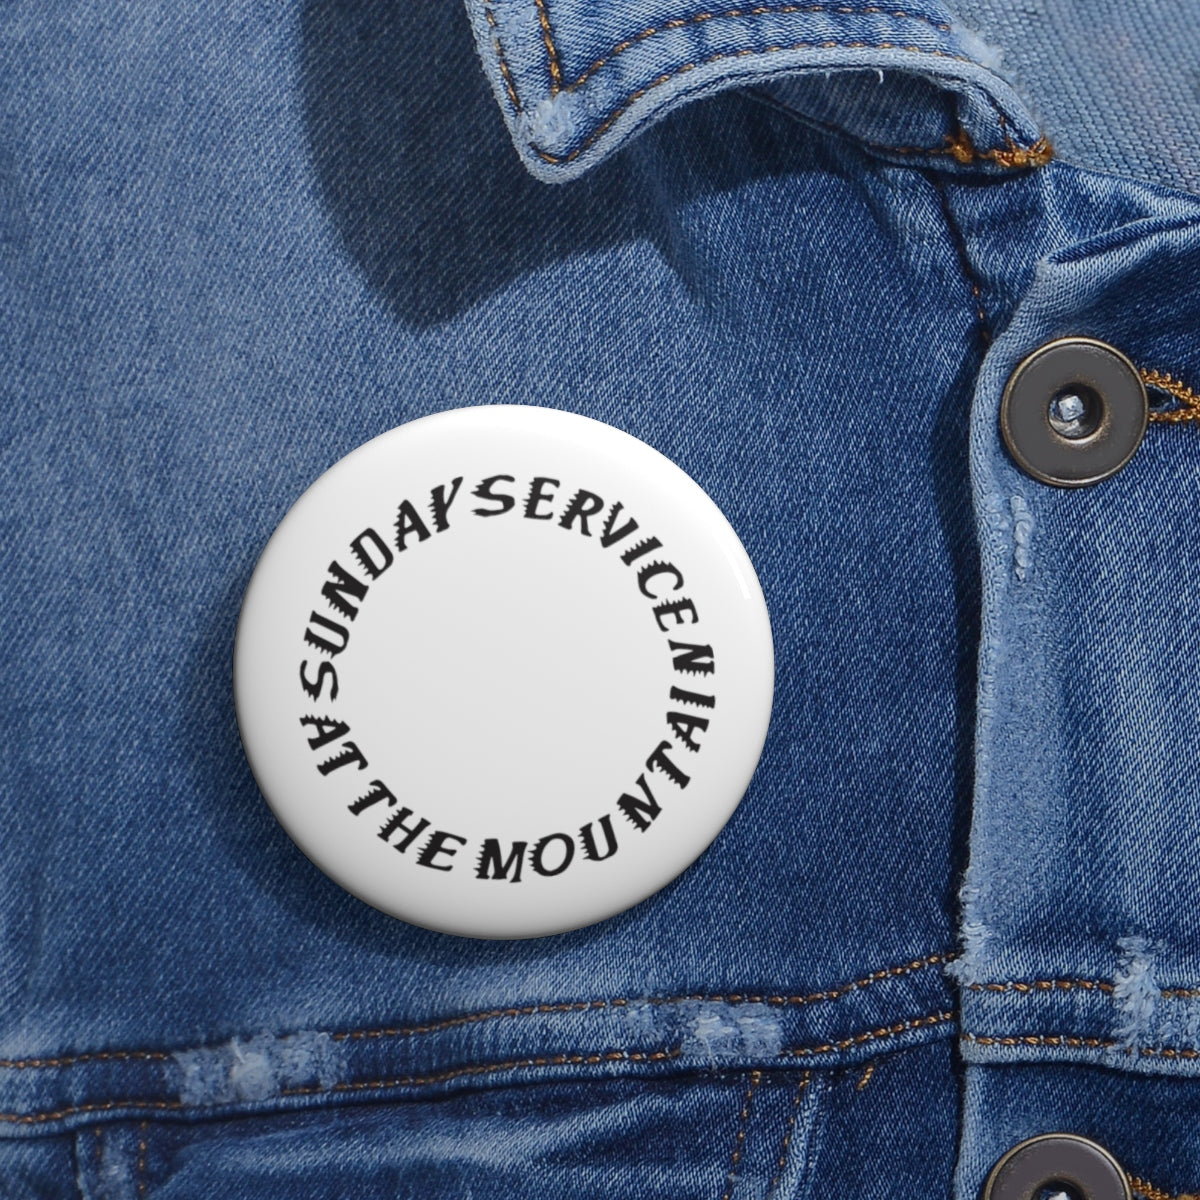 Sunday Service at the Mountain Kanye West inspired Pin Buttons-Archethype